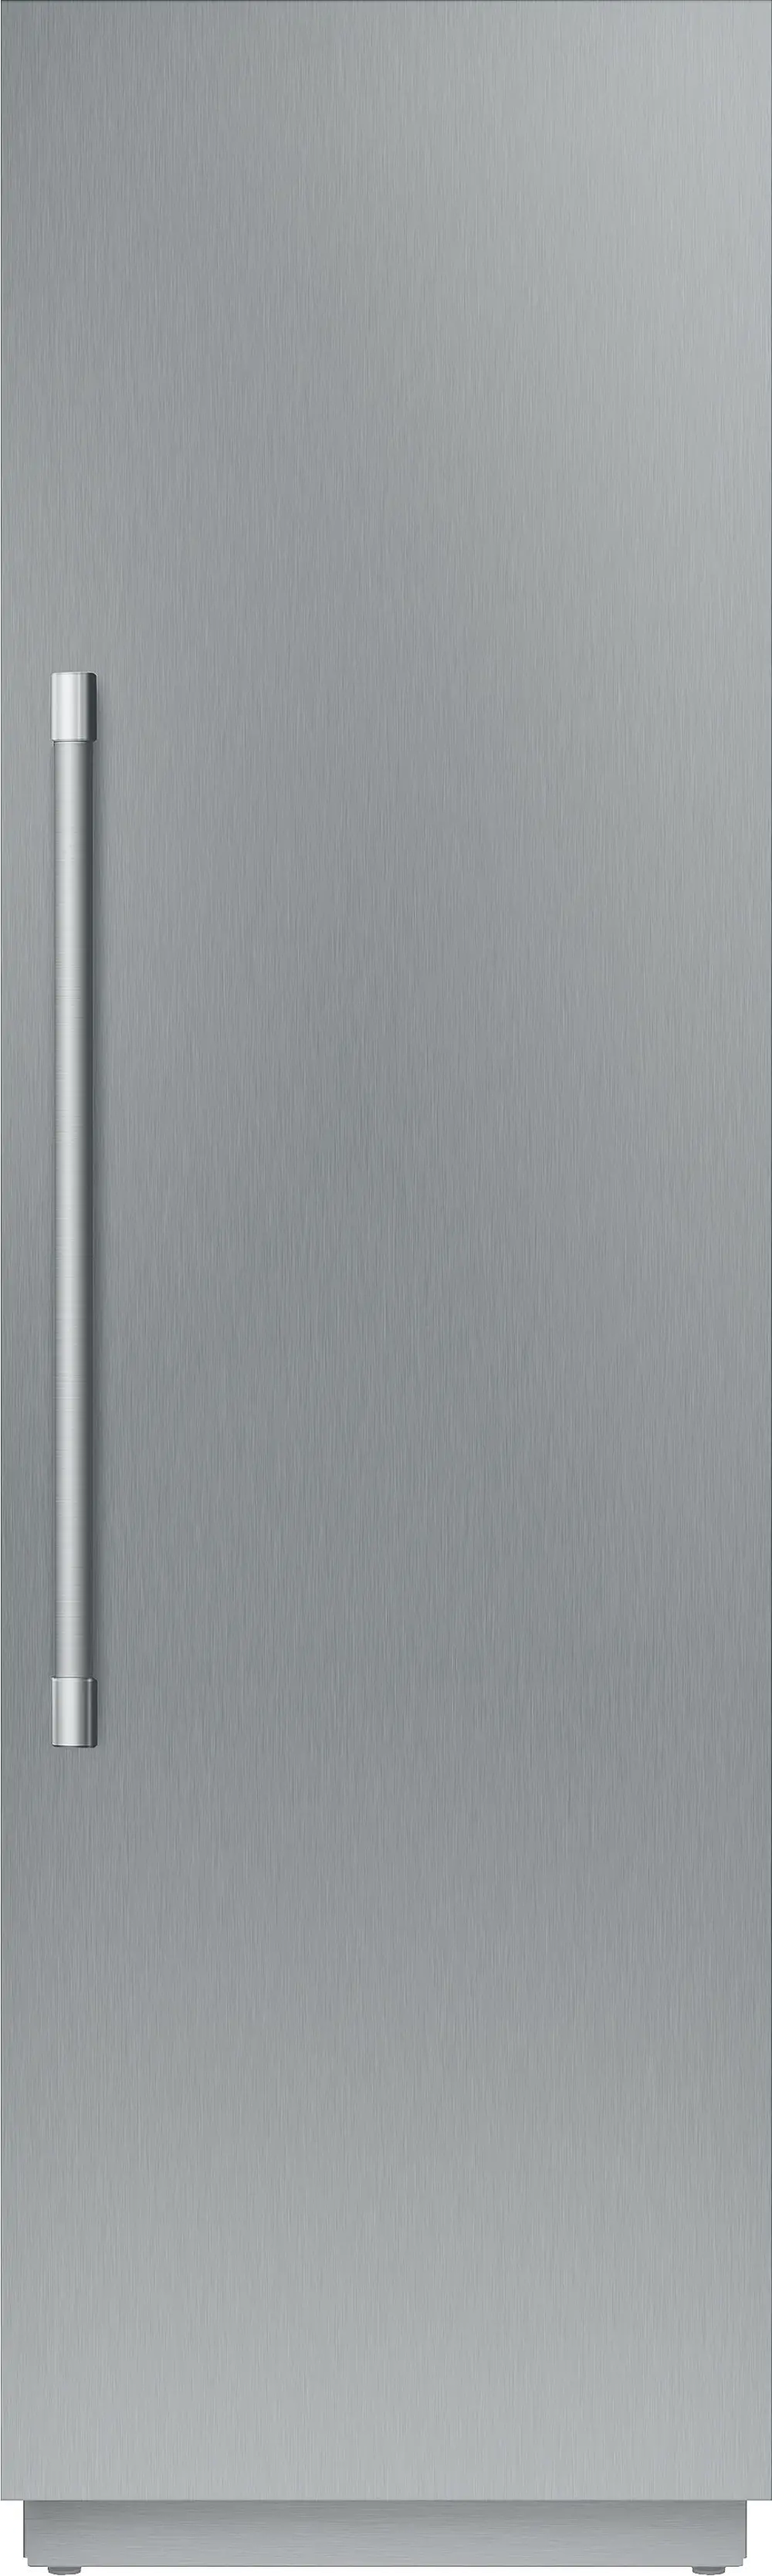 T24IR905SP Thermador 24 Inch Smart Refrigerator with Stainless Steel Interior - Panel Ready, 13 cu. ft.-1